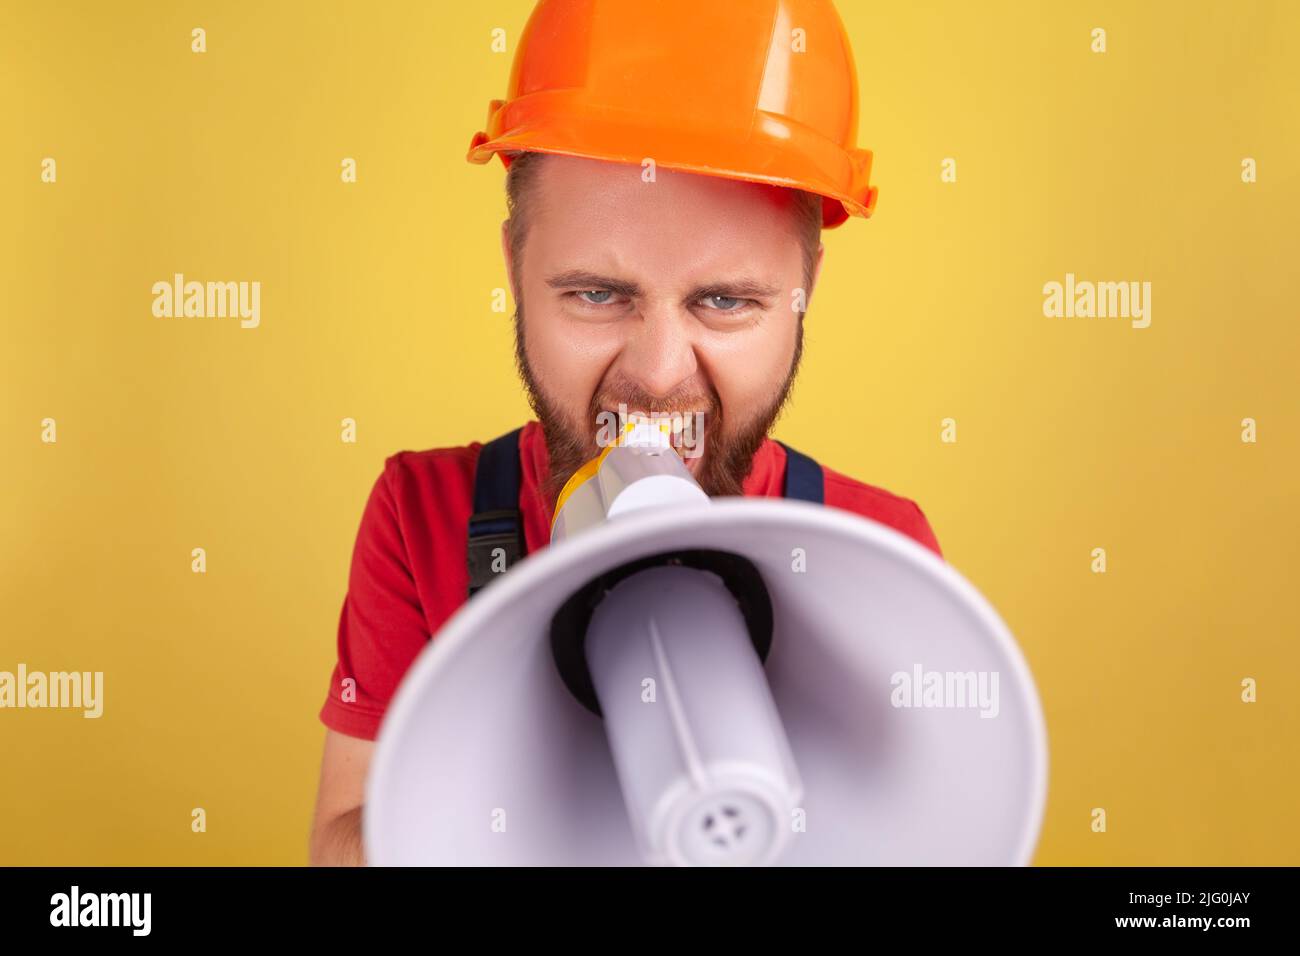 Portrait of angry aggressive worker man wearing uniform and protective helmet taking selfie, point of view of photo, screaming in megaphone. Indoor studio shot isolated on yellow background. Stock Photo